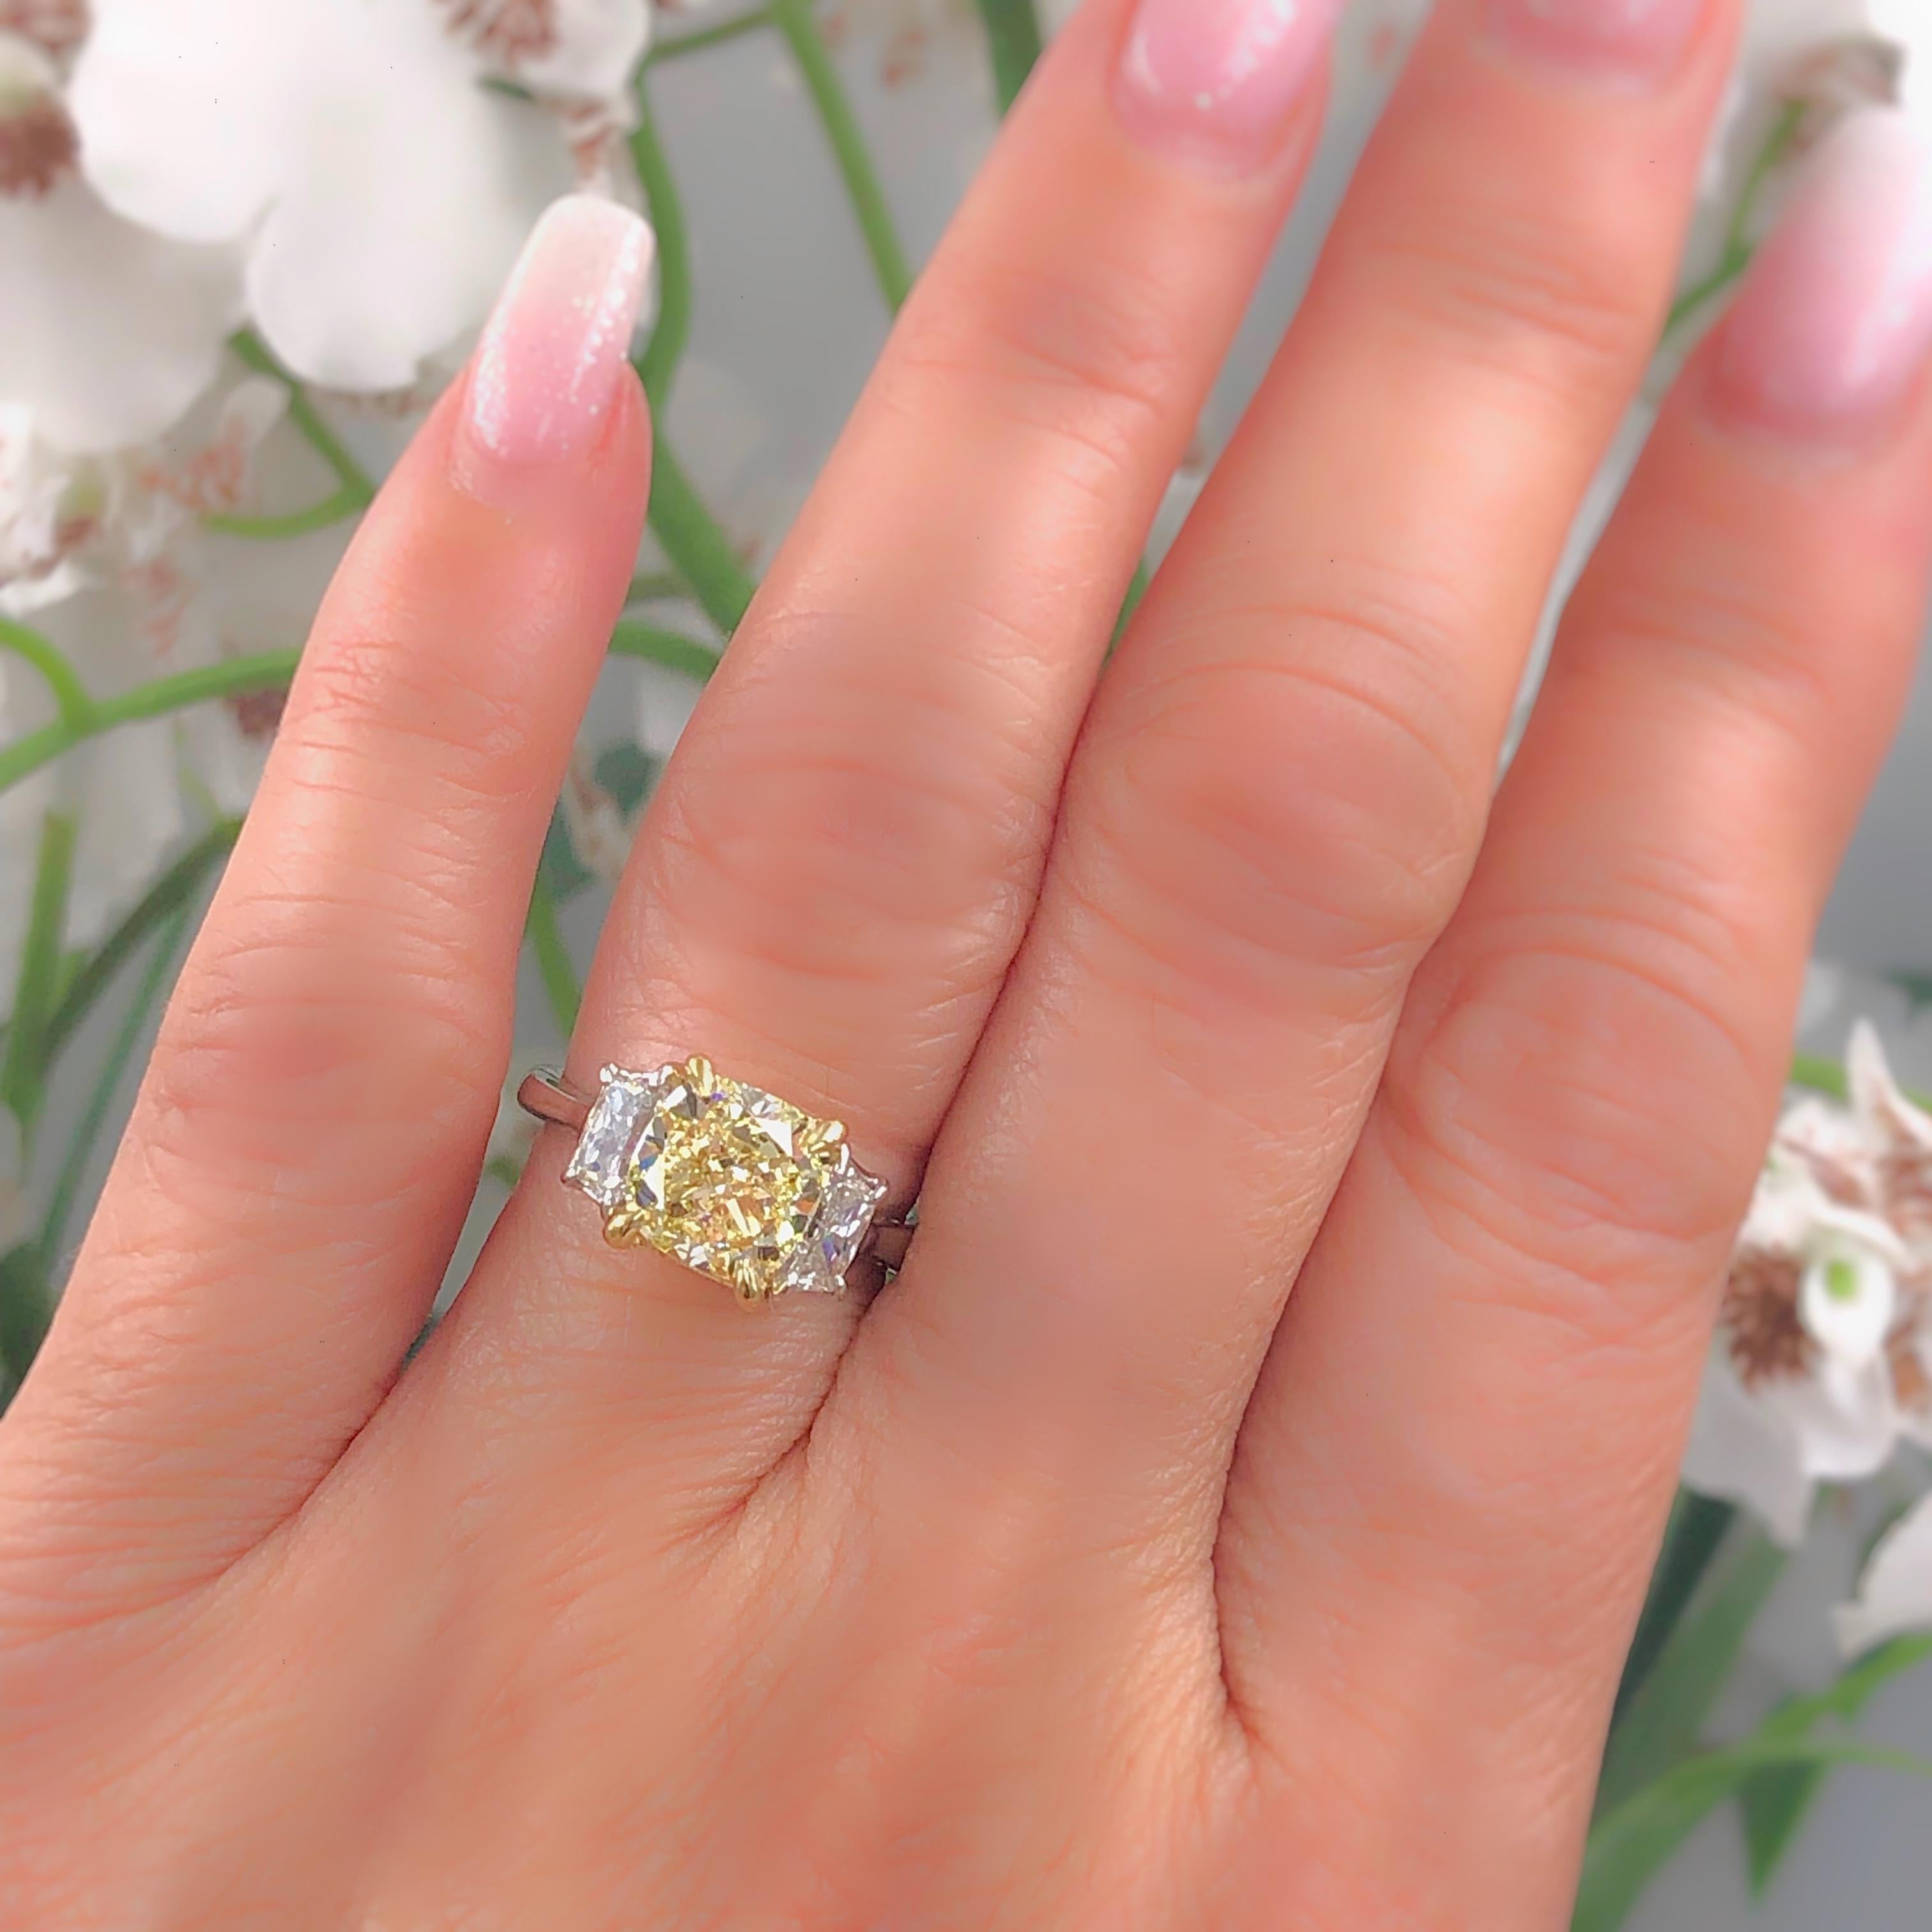 FANCY YELLOW CUSHION DIAMOND THREE-STONE ENGAGEMENT RING

Style:  3-Stone
Serial Number:  GIA#5151807803
Metal:  Platinum with 18k Yellow Gold Prongs and Basket
Size:  6 - sizable
Total Carat Weight:  2.75 tcw
Diamond Shape:  Cushion Modified